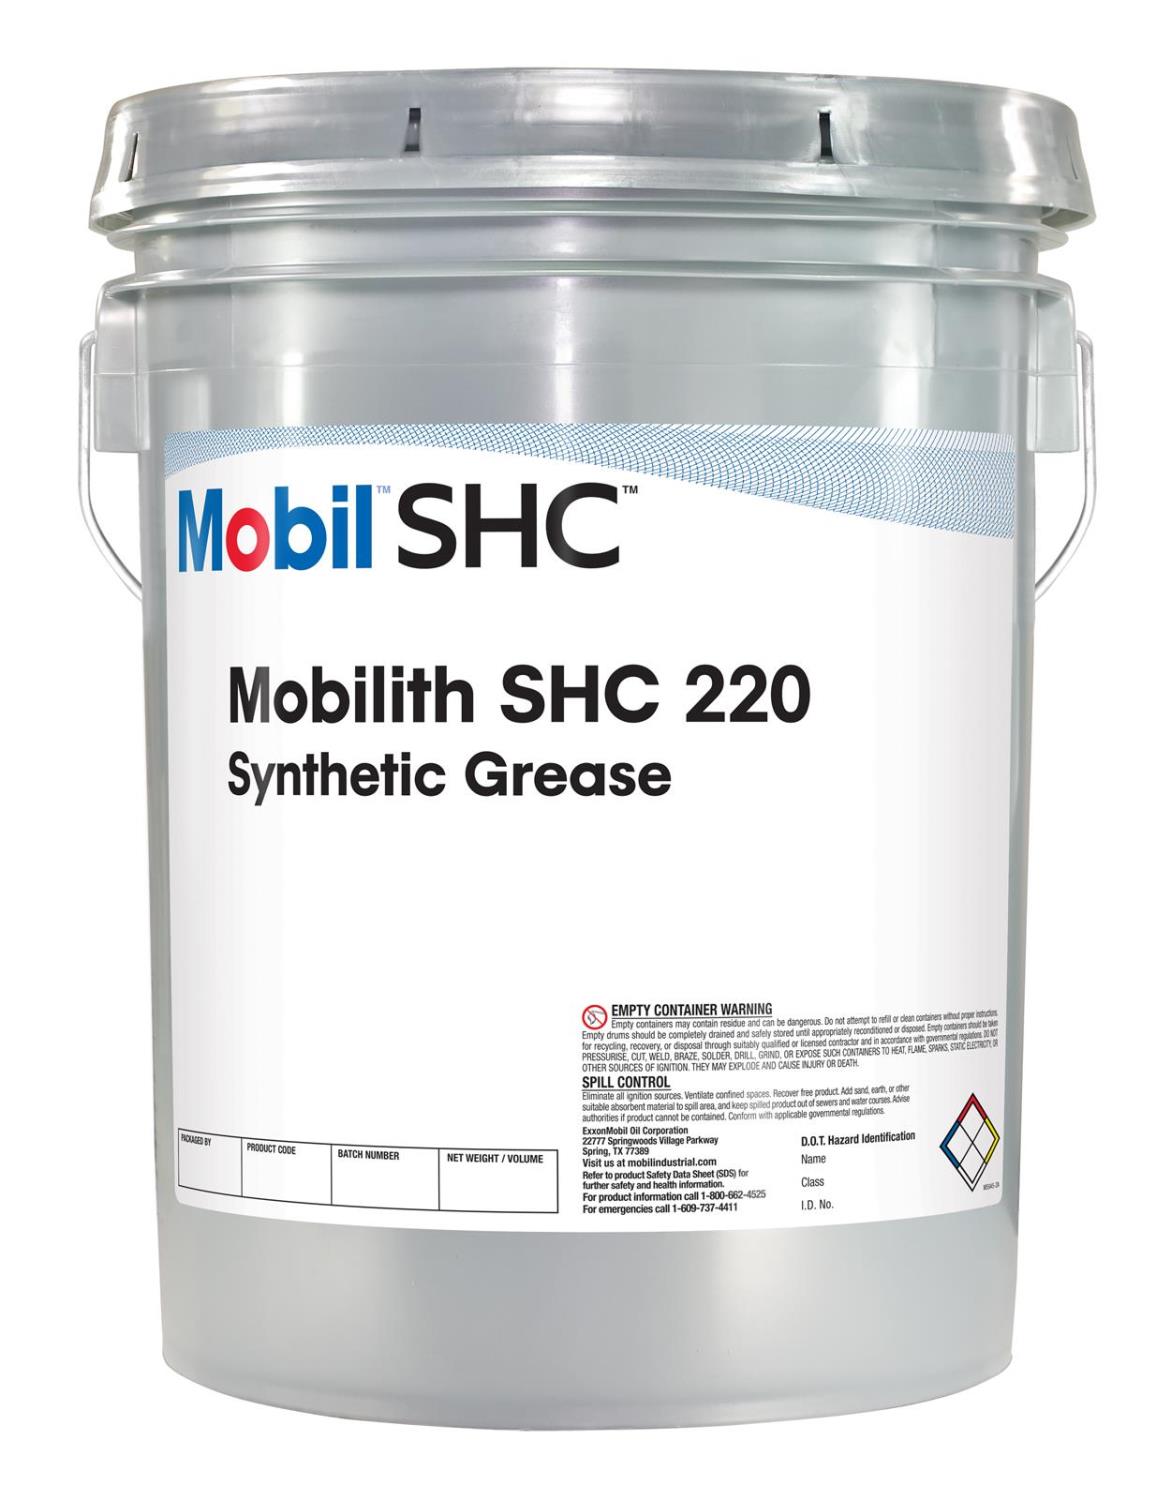 105801 Mobilith SHC 220 Grease [35 lbs.]